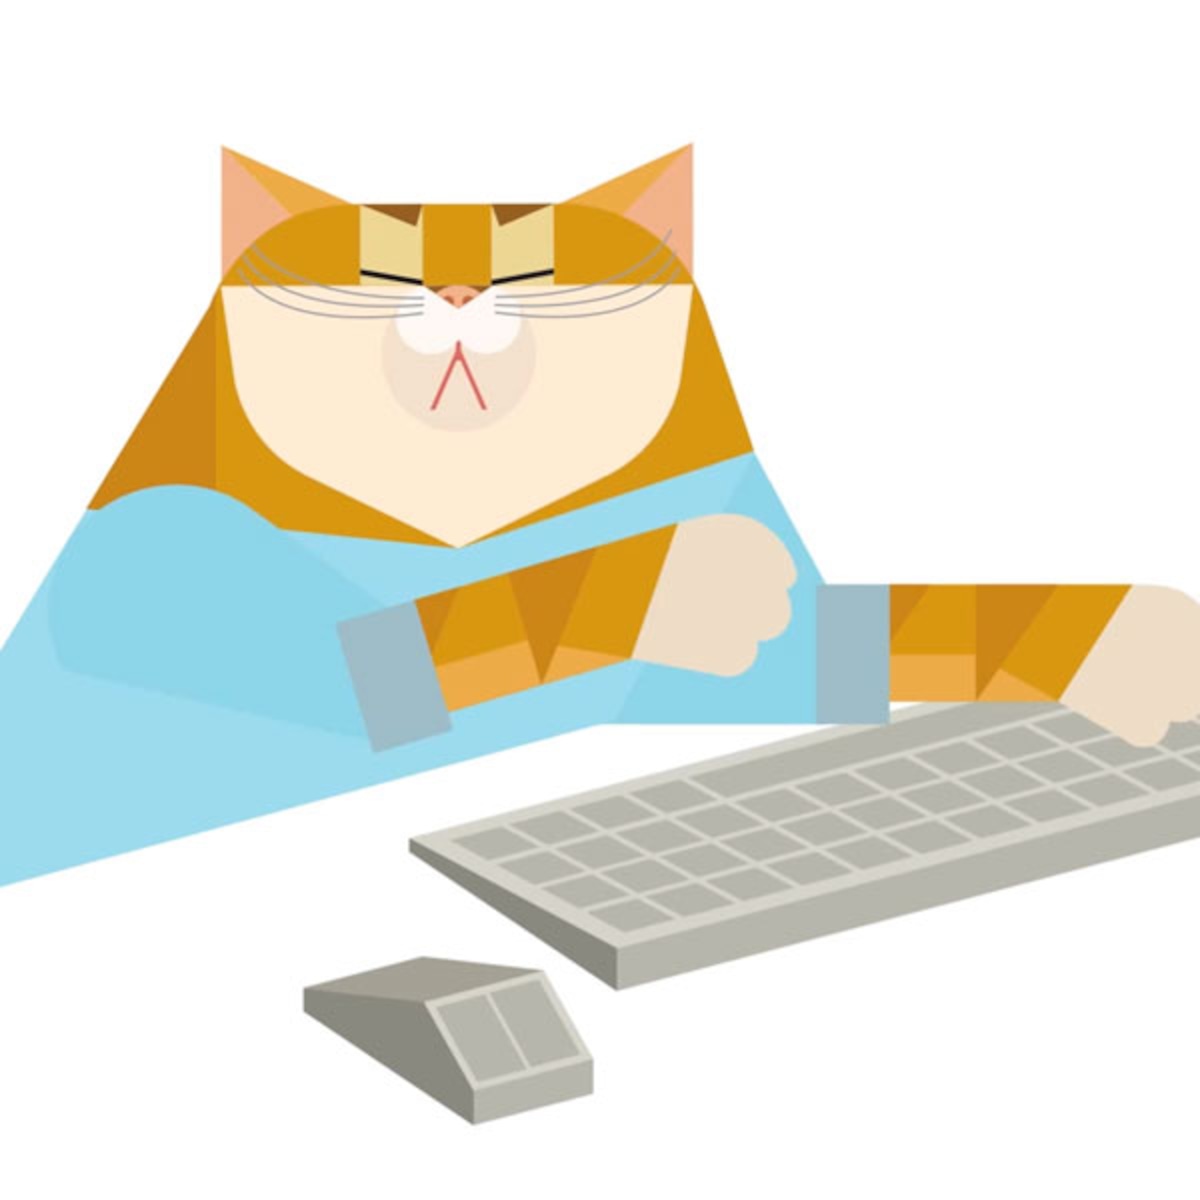 Keyboard Cat's Back in New Ad - E! Online